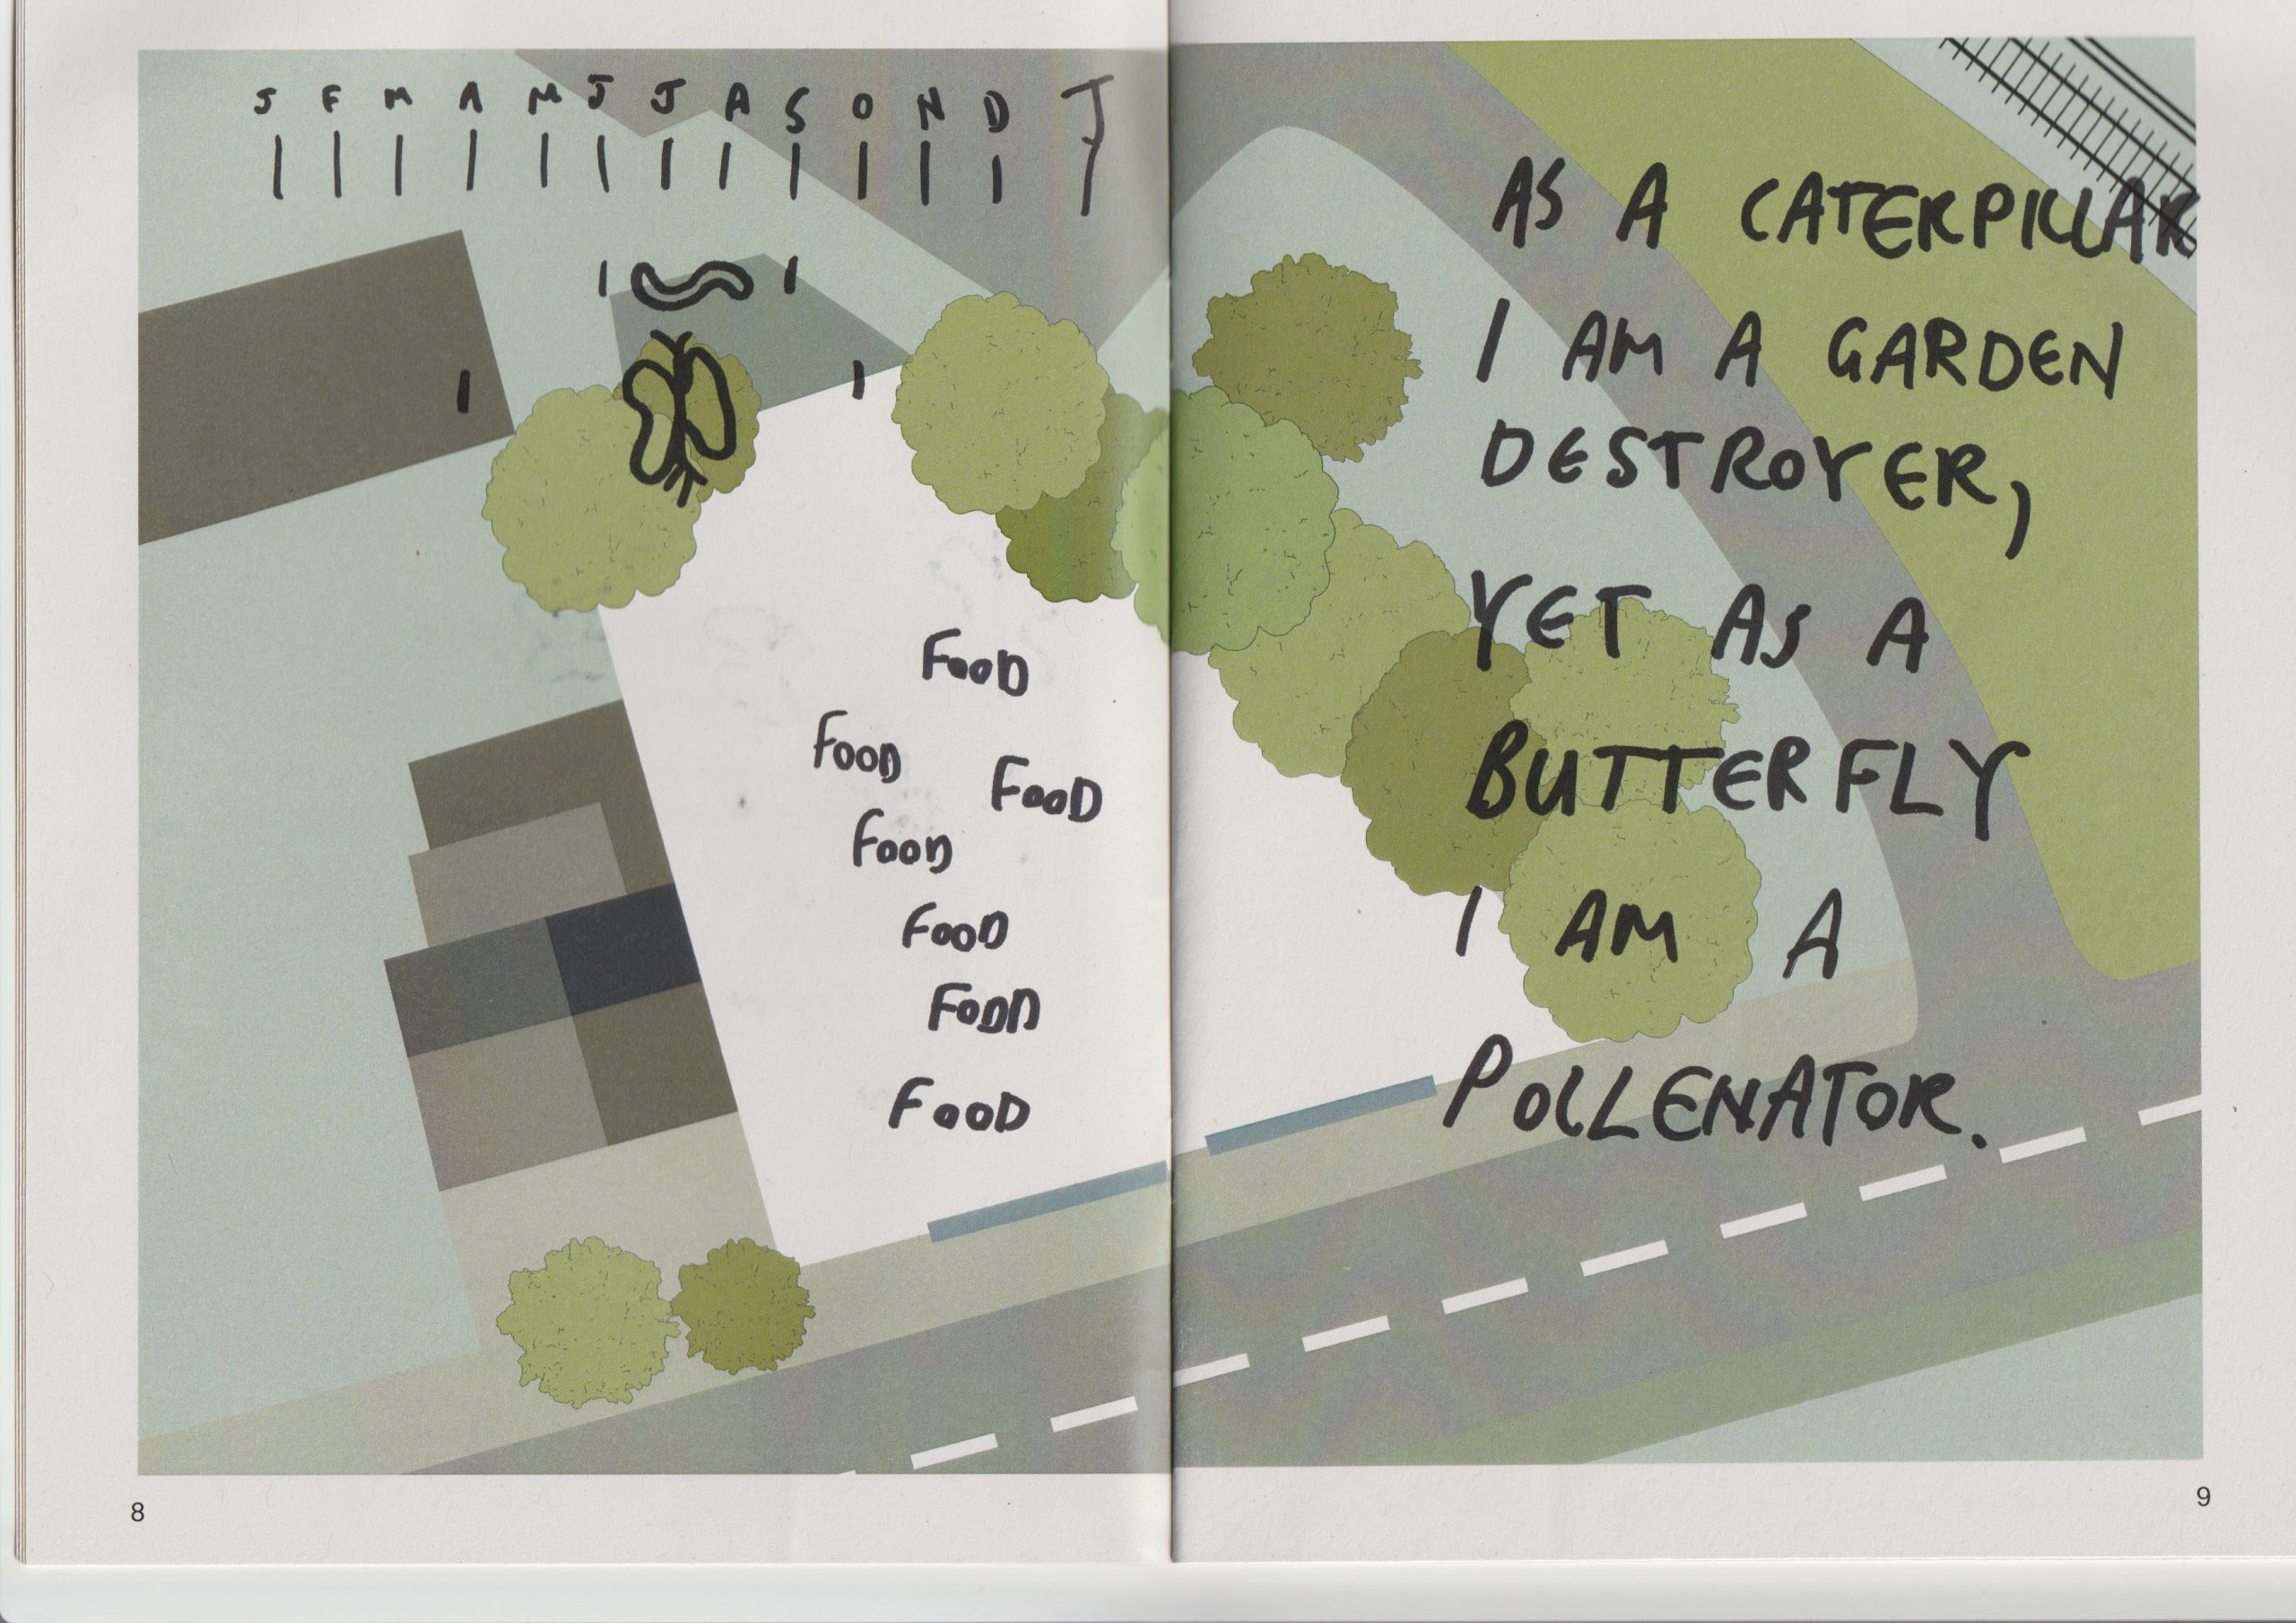 image from a completed activity book: block colours outlining a map of a garden space. Participant has written in black marker: "As a caterpiller I am a garden destroyer, yet as a butterfly I am a pollenator.